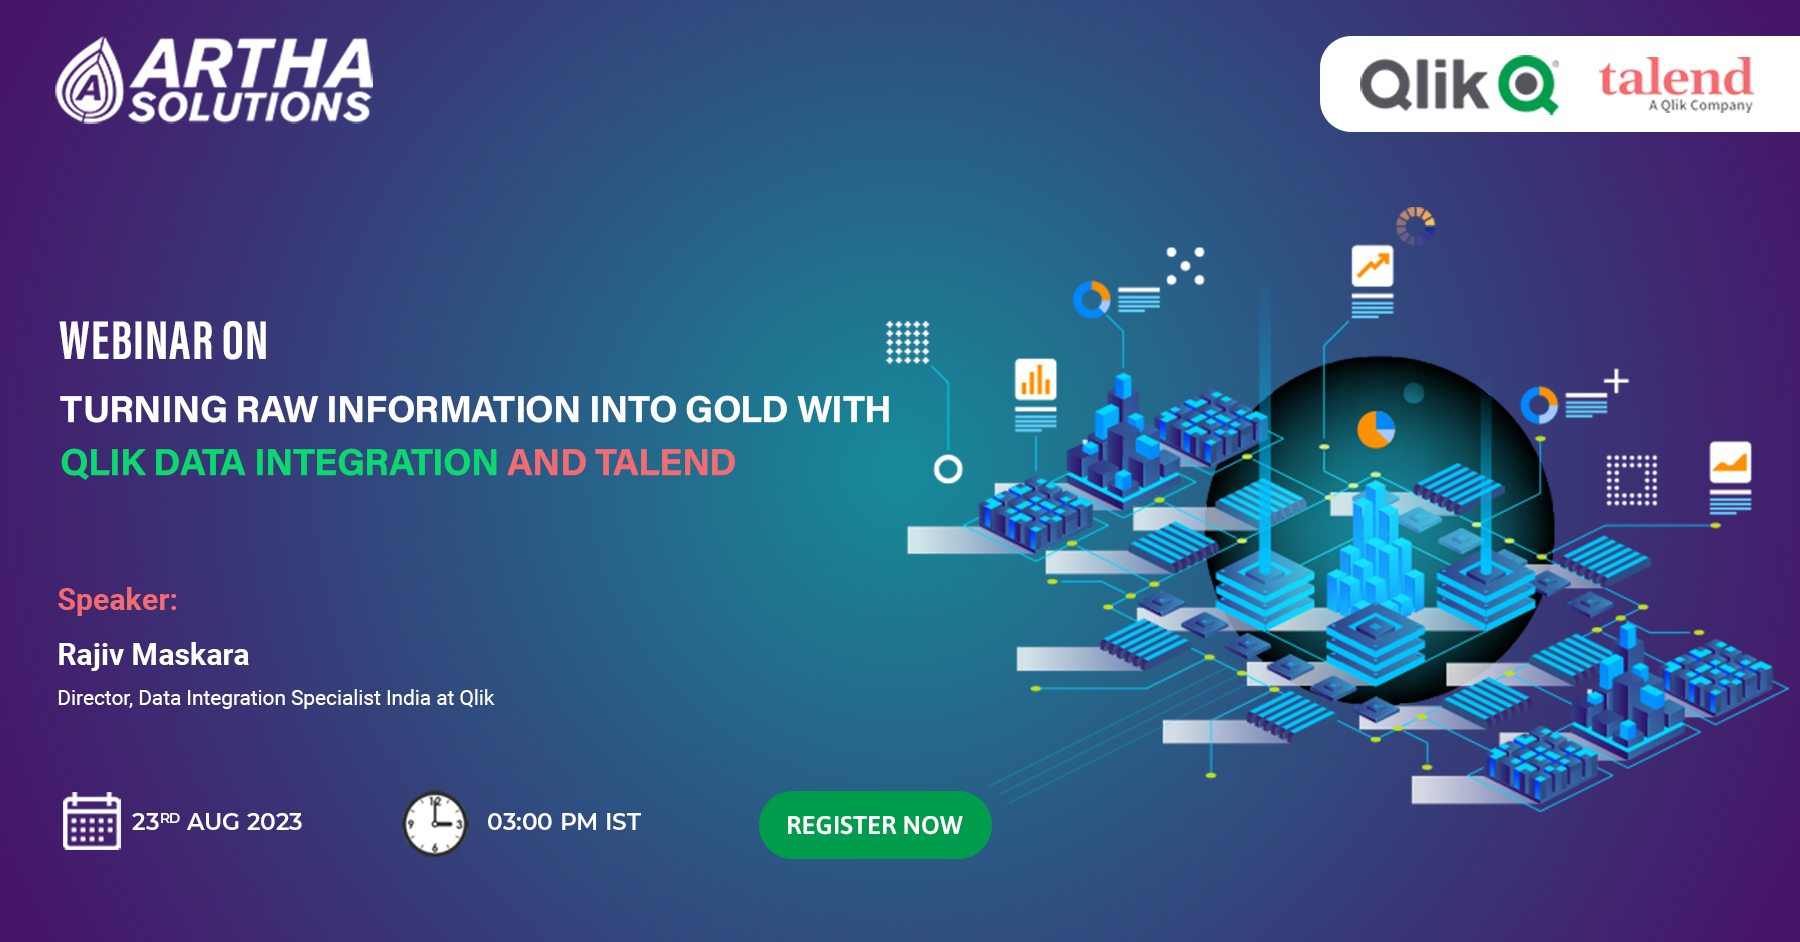 Artha Solutions | Turning Raw Information into Gold with Qlik Data Integration and Talend